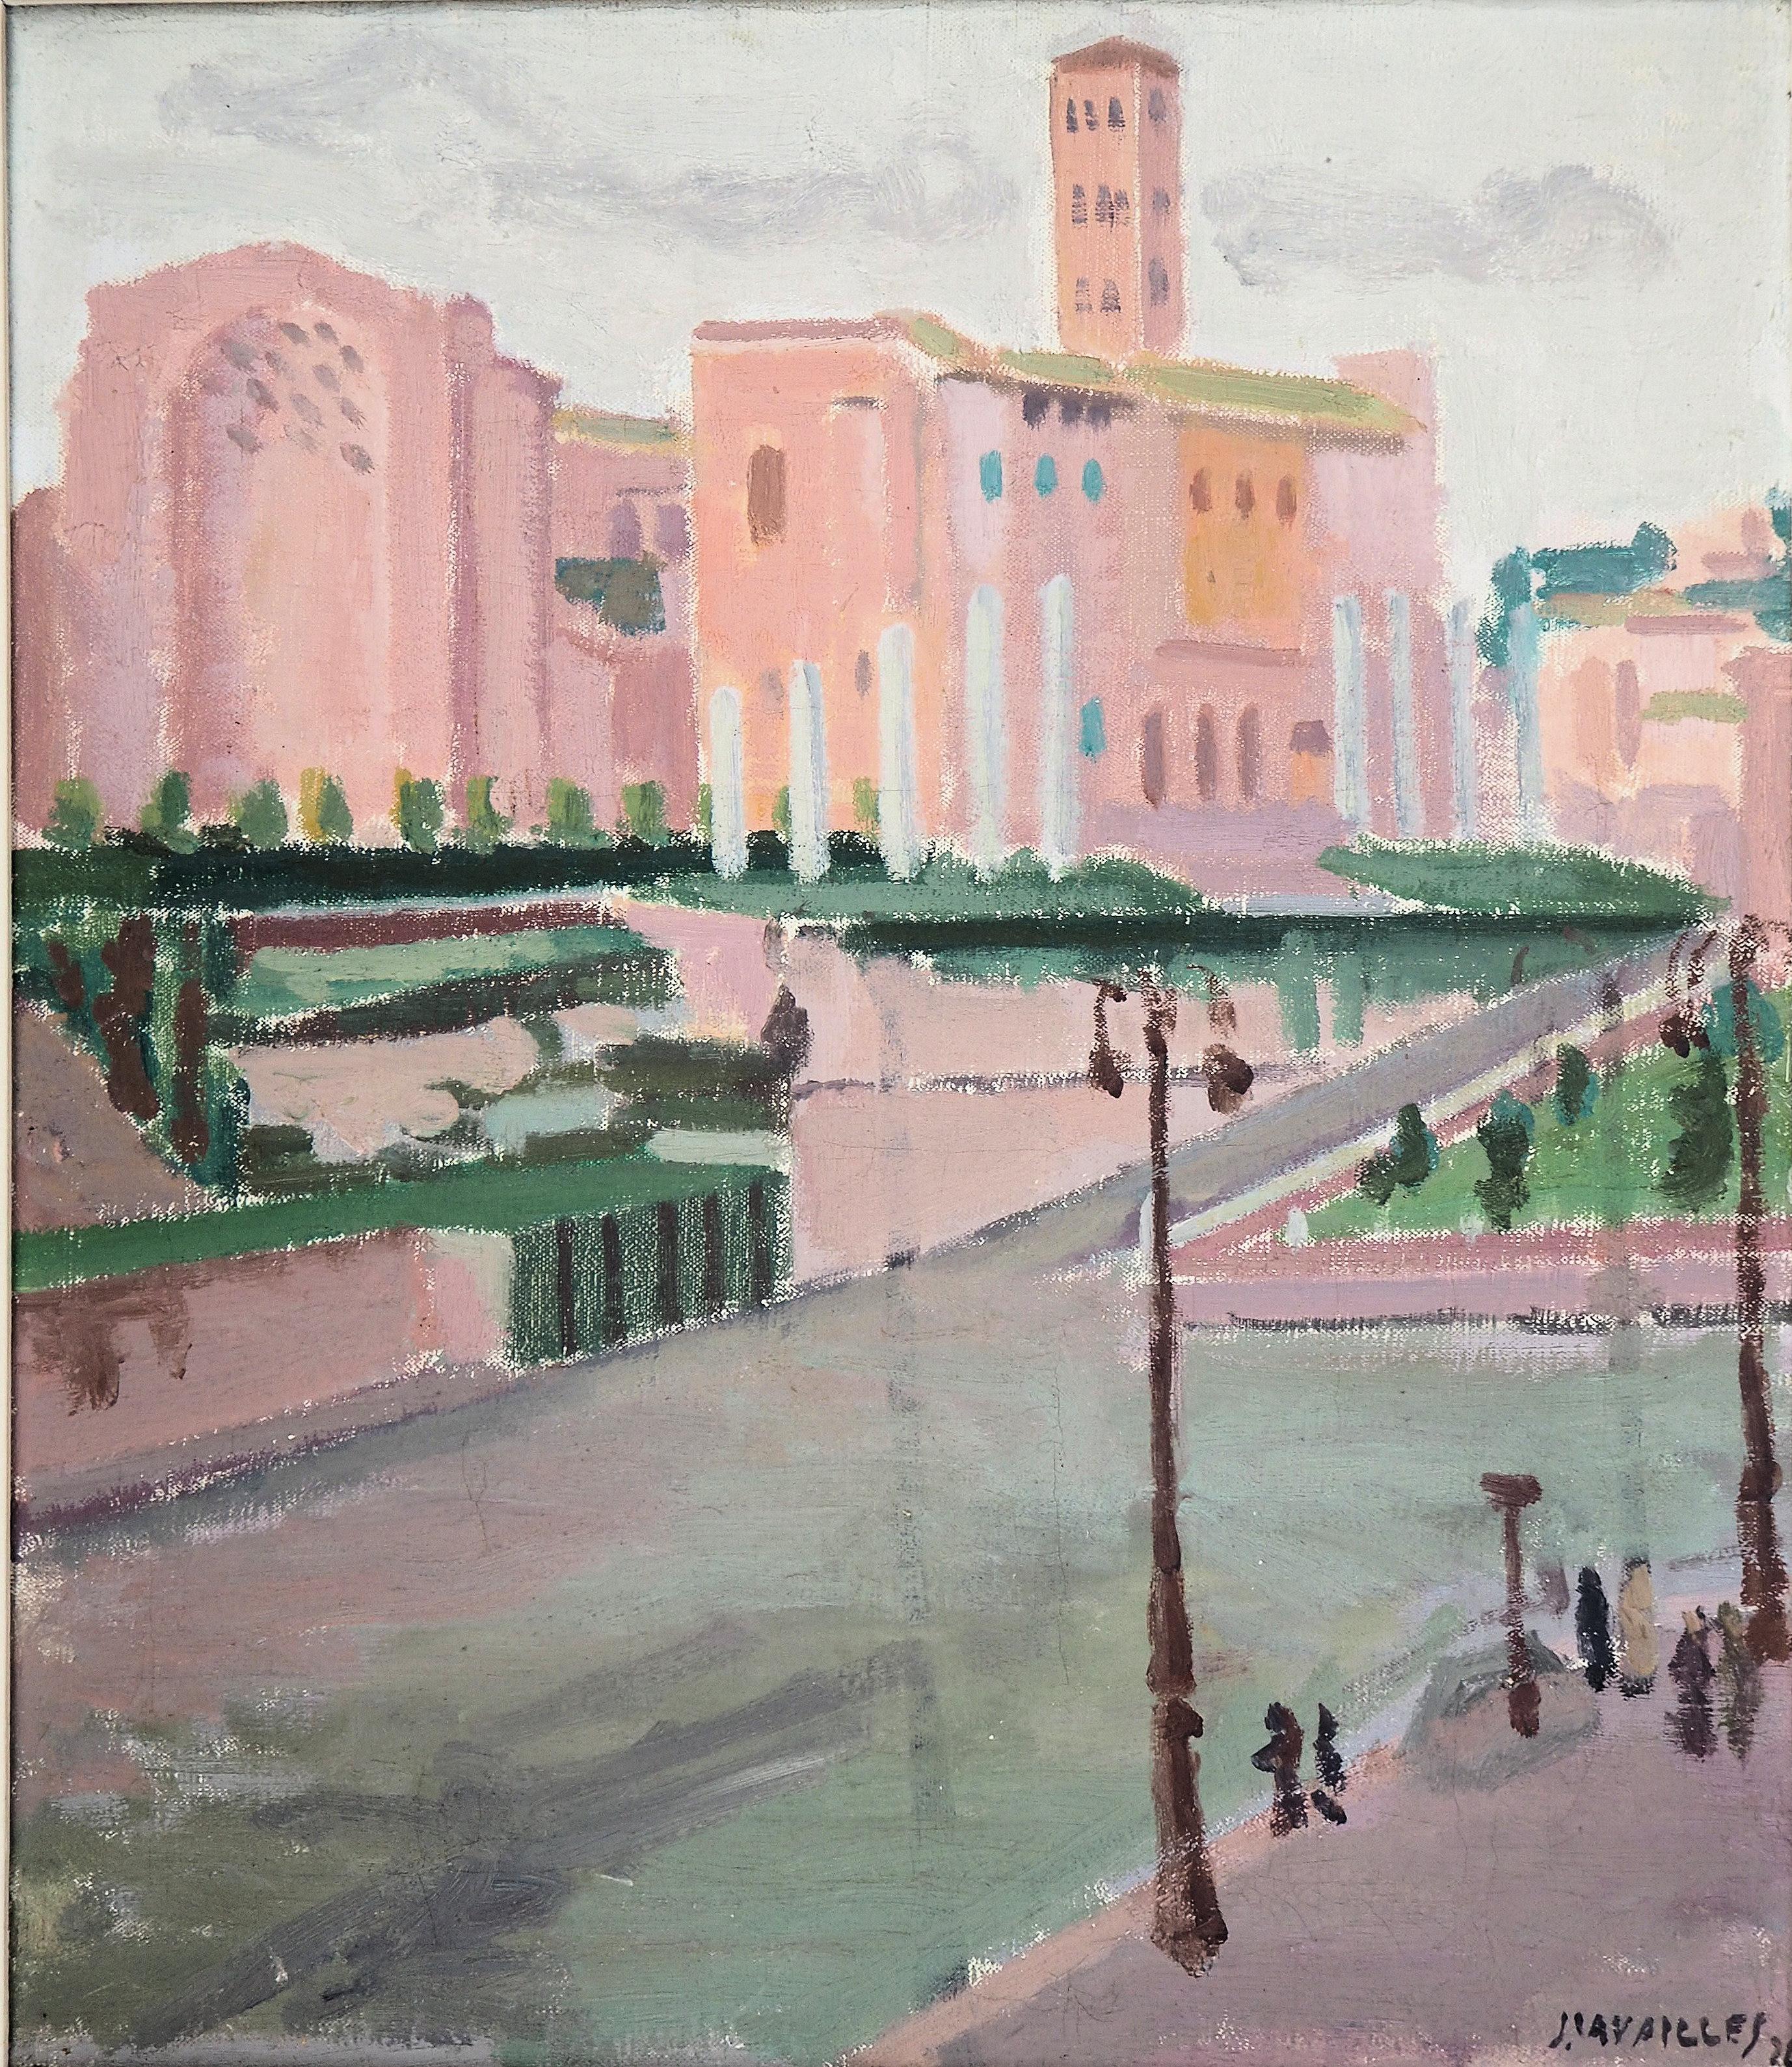 Rome, The Forum Seen From the Colosseum - Original Oil on canvas, Signed - Painting by Jules Cavailles